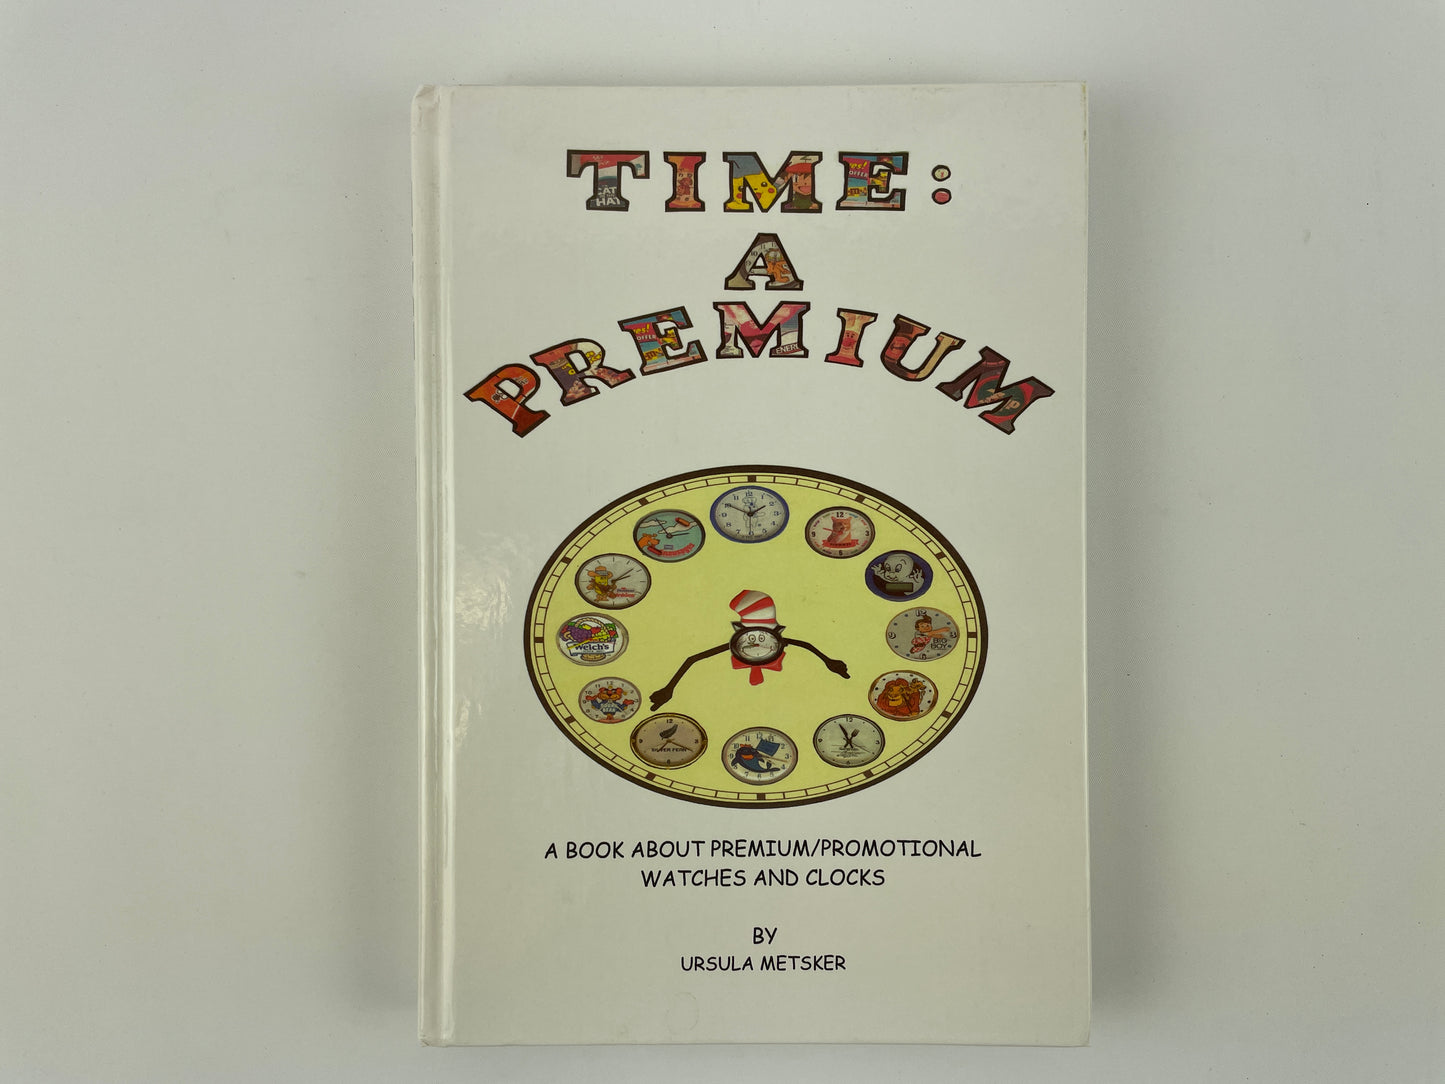 Lot 132- Time: A Premium by Ursula Metsker